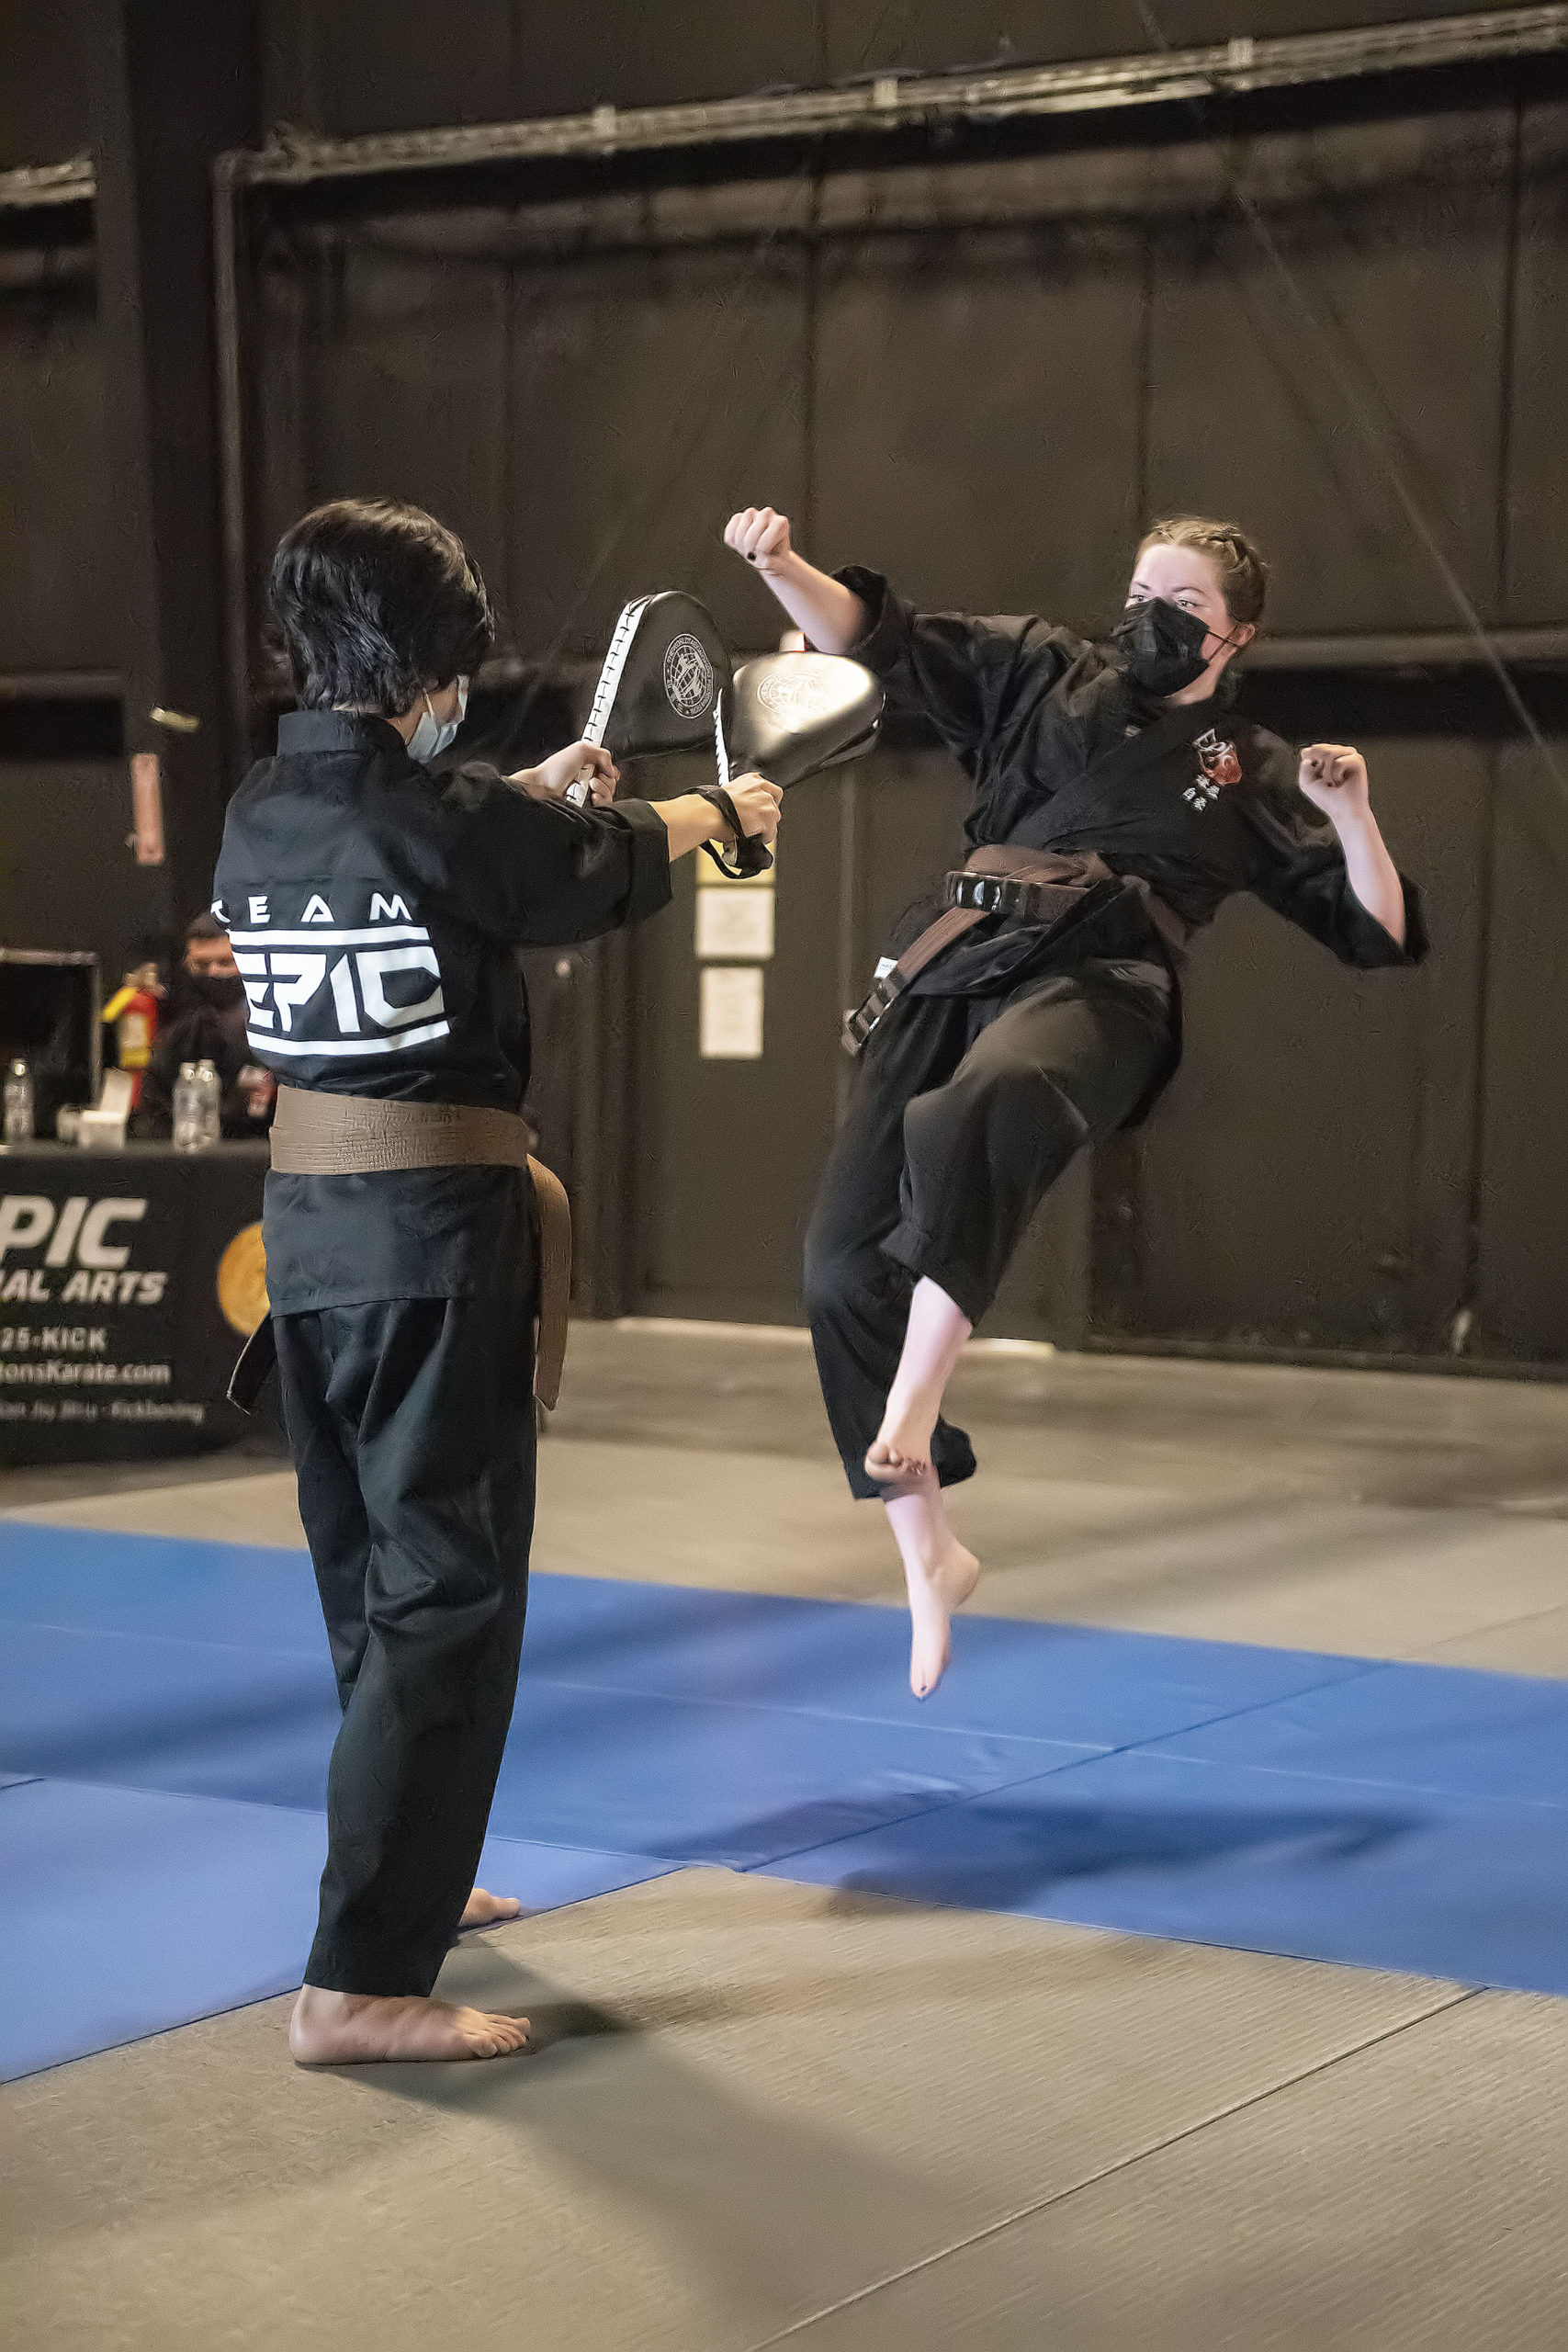 EPIC Martial Arts brown belt student Emily Glass performs a series of skills before a panel of six black belts in order to receive her own promotion to black belt during a ceremony at LTV studios in Wainscott on Sunday.